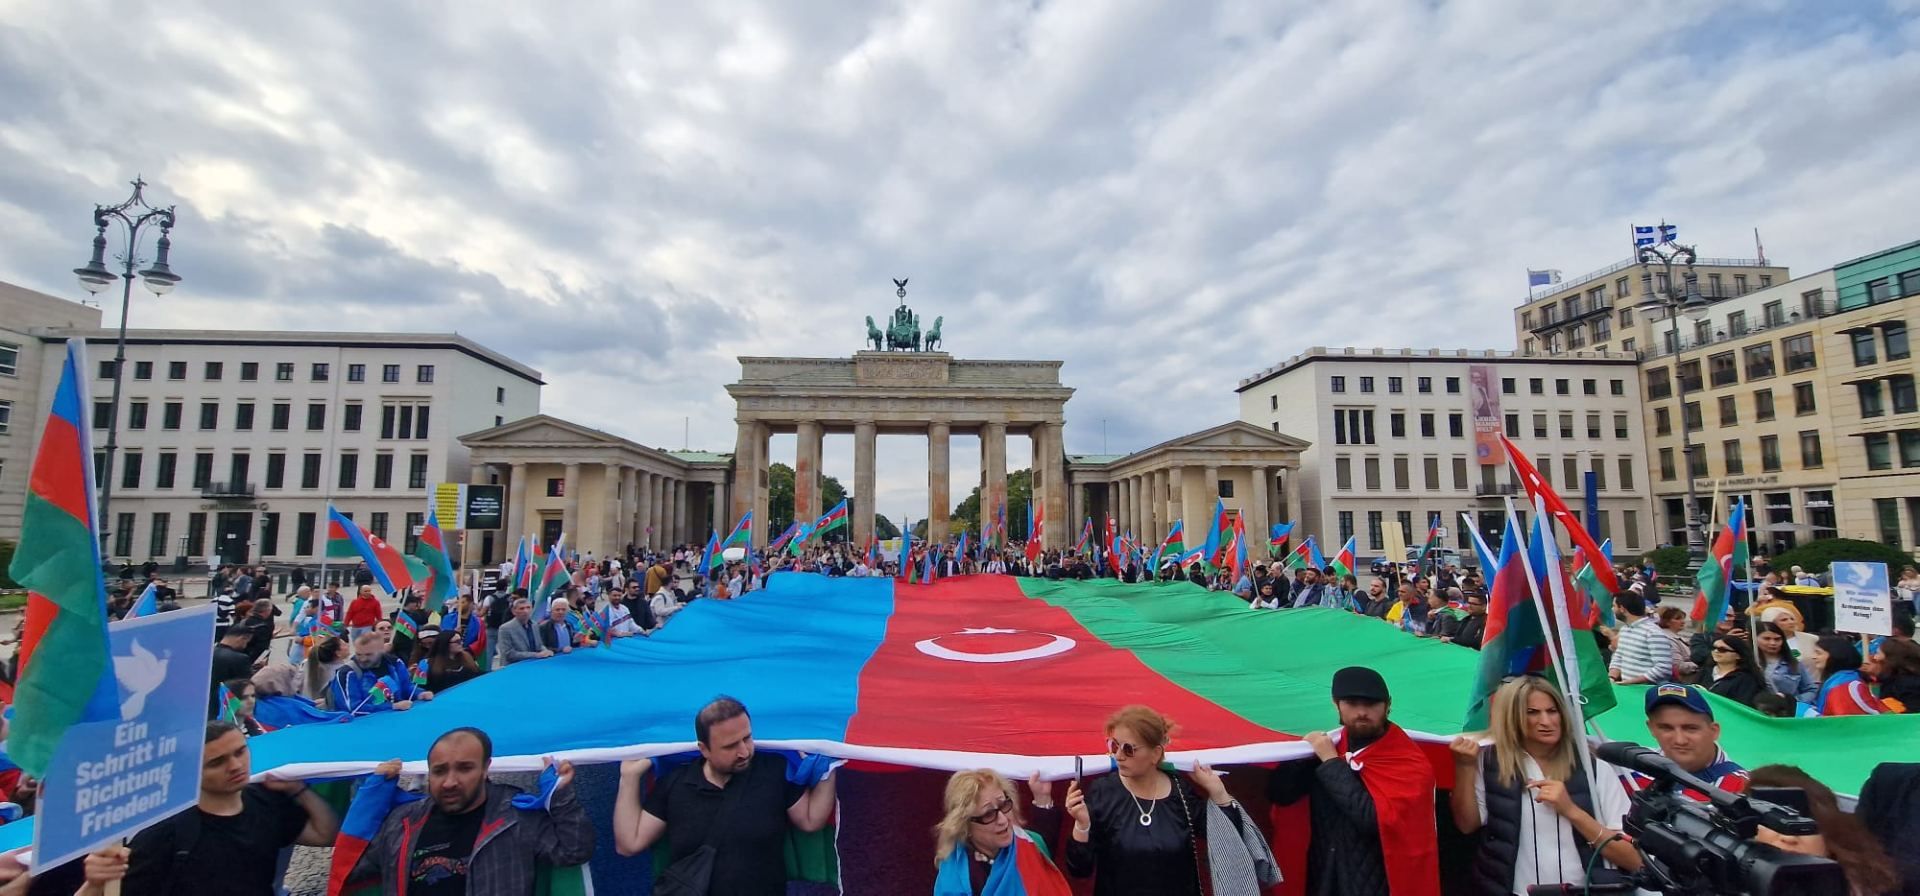 Azerbaijanis living in Germany hold peaceful protest [PHOTOS/VIDEOS]